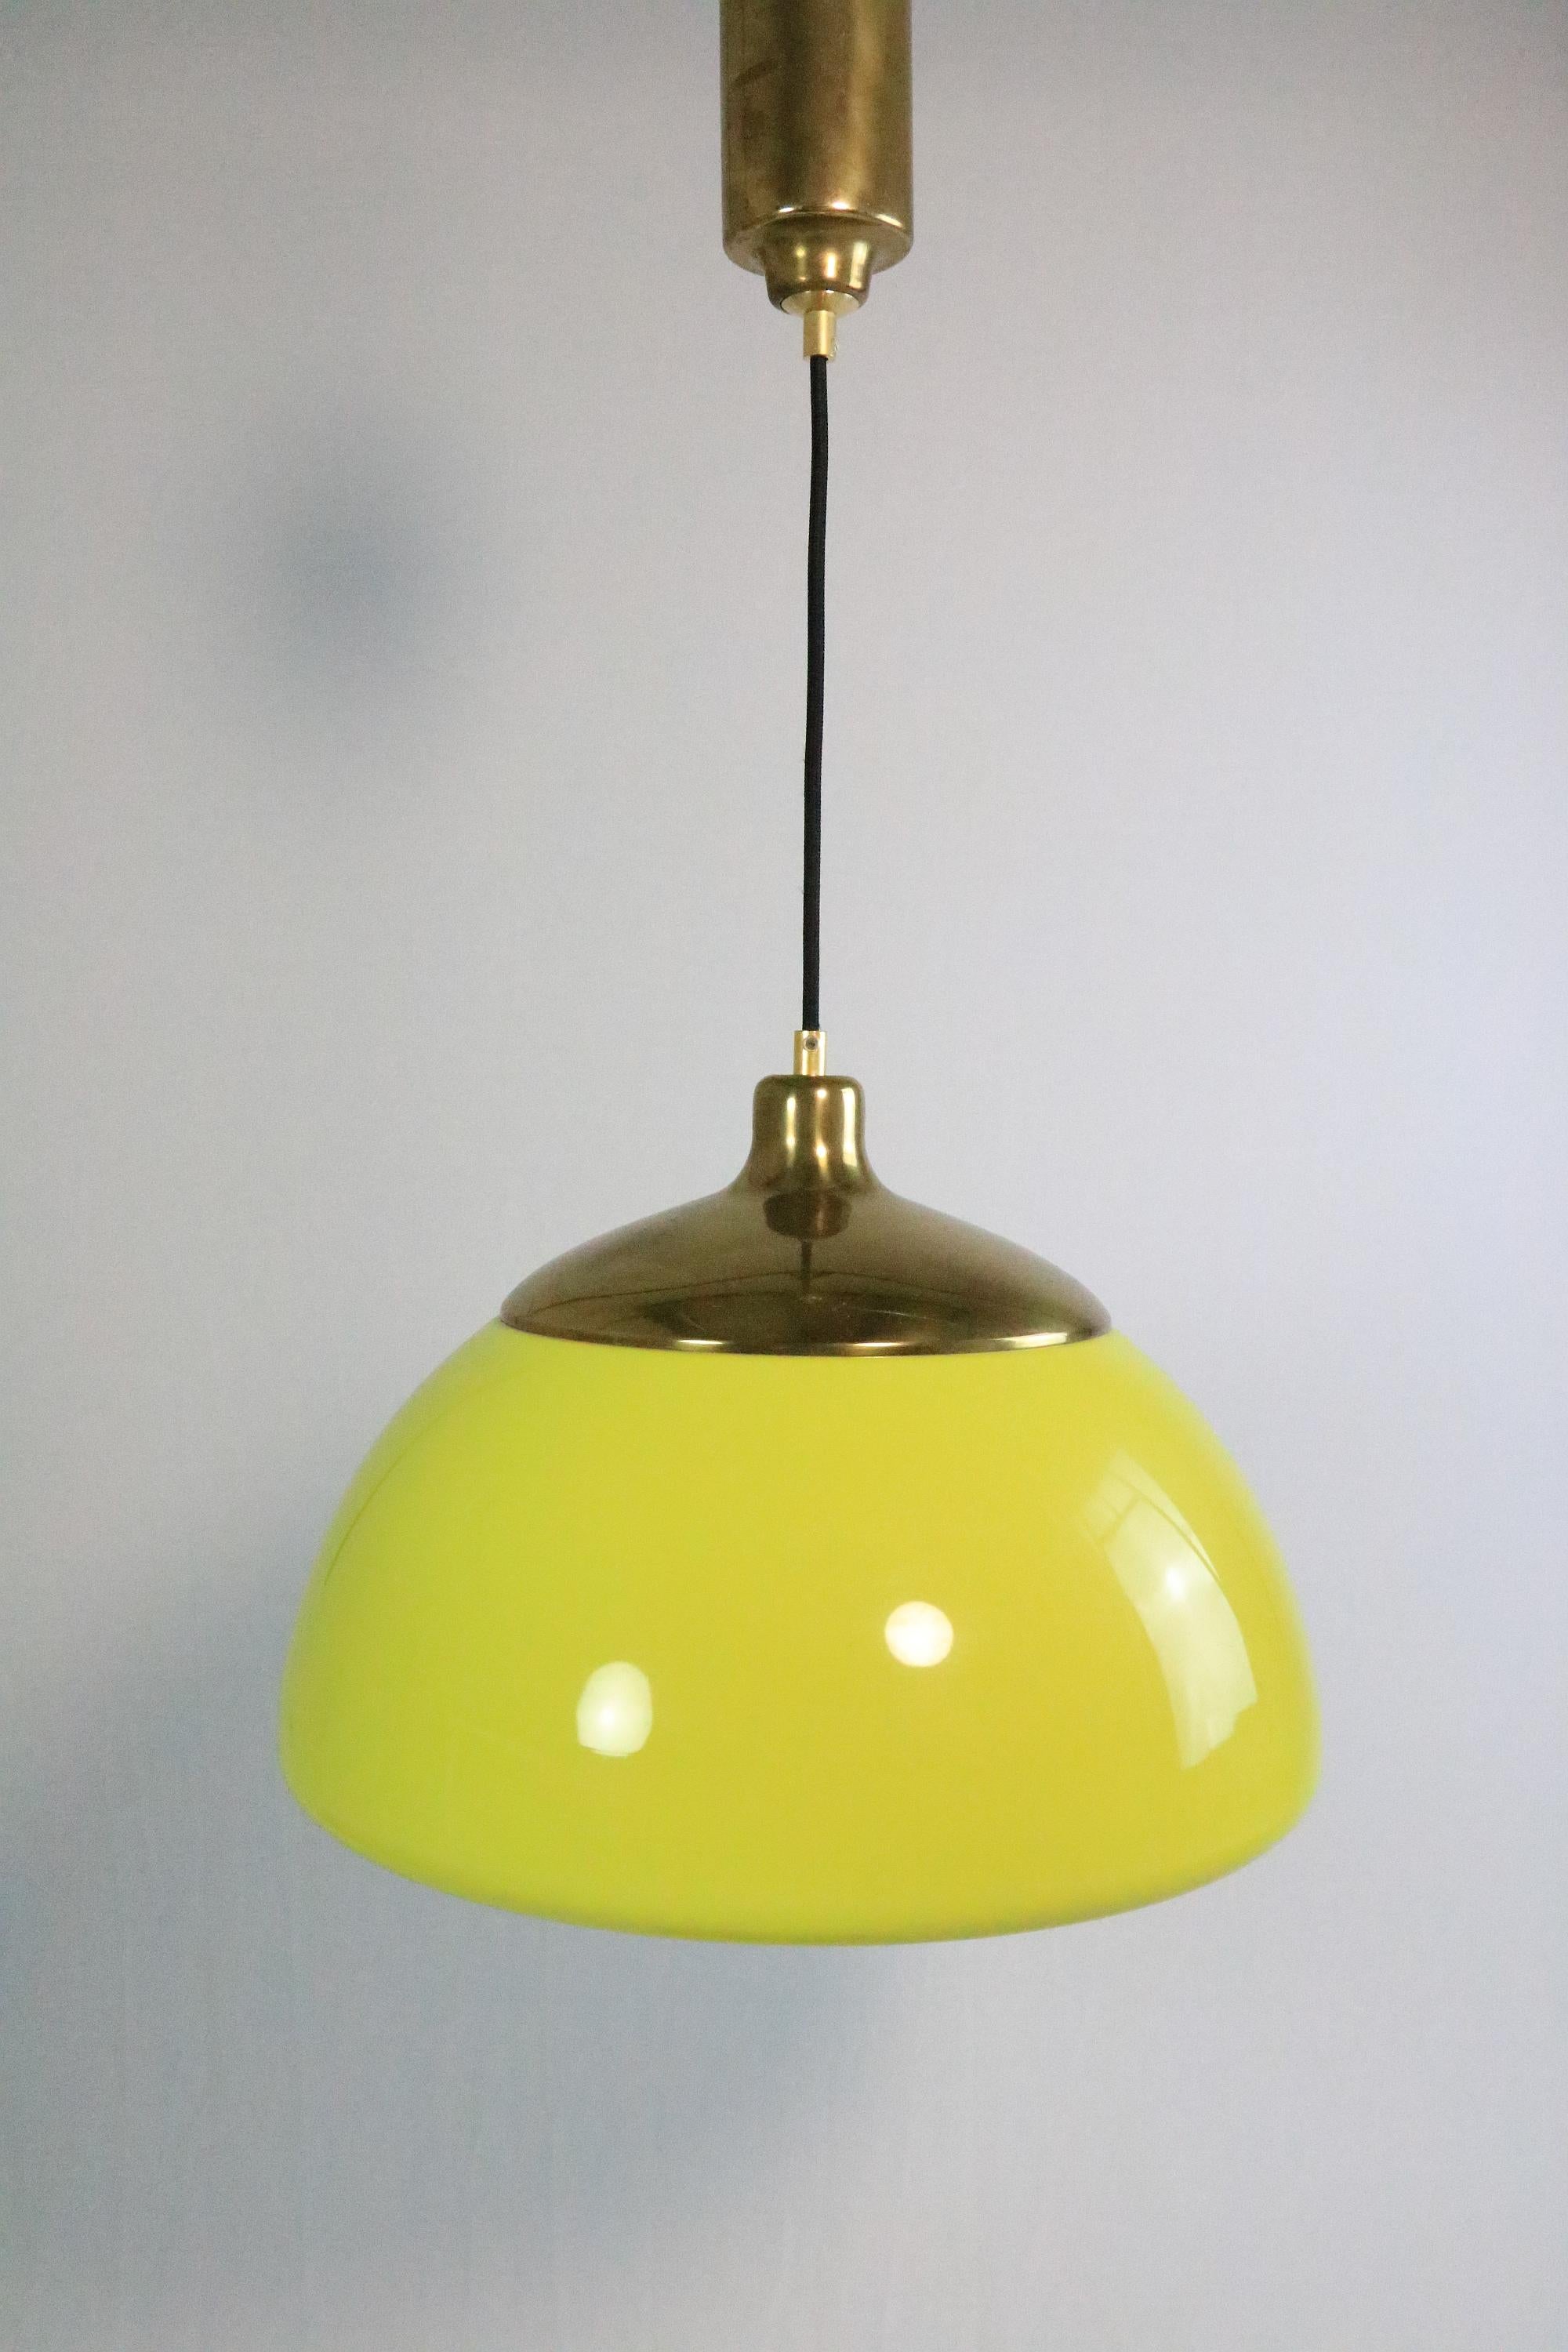 Brass Original 1970s Pendant Light from COSACK, Germany For Sale